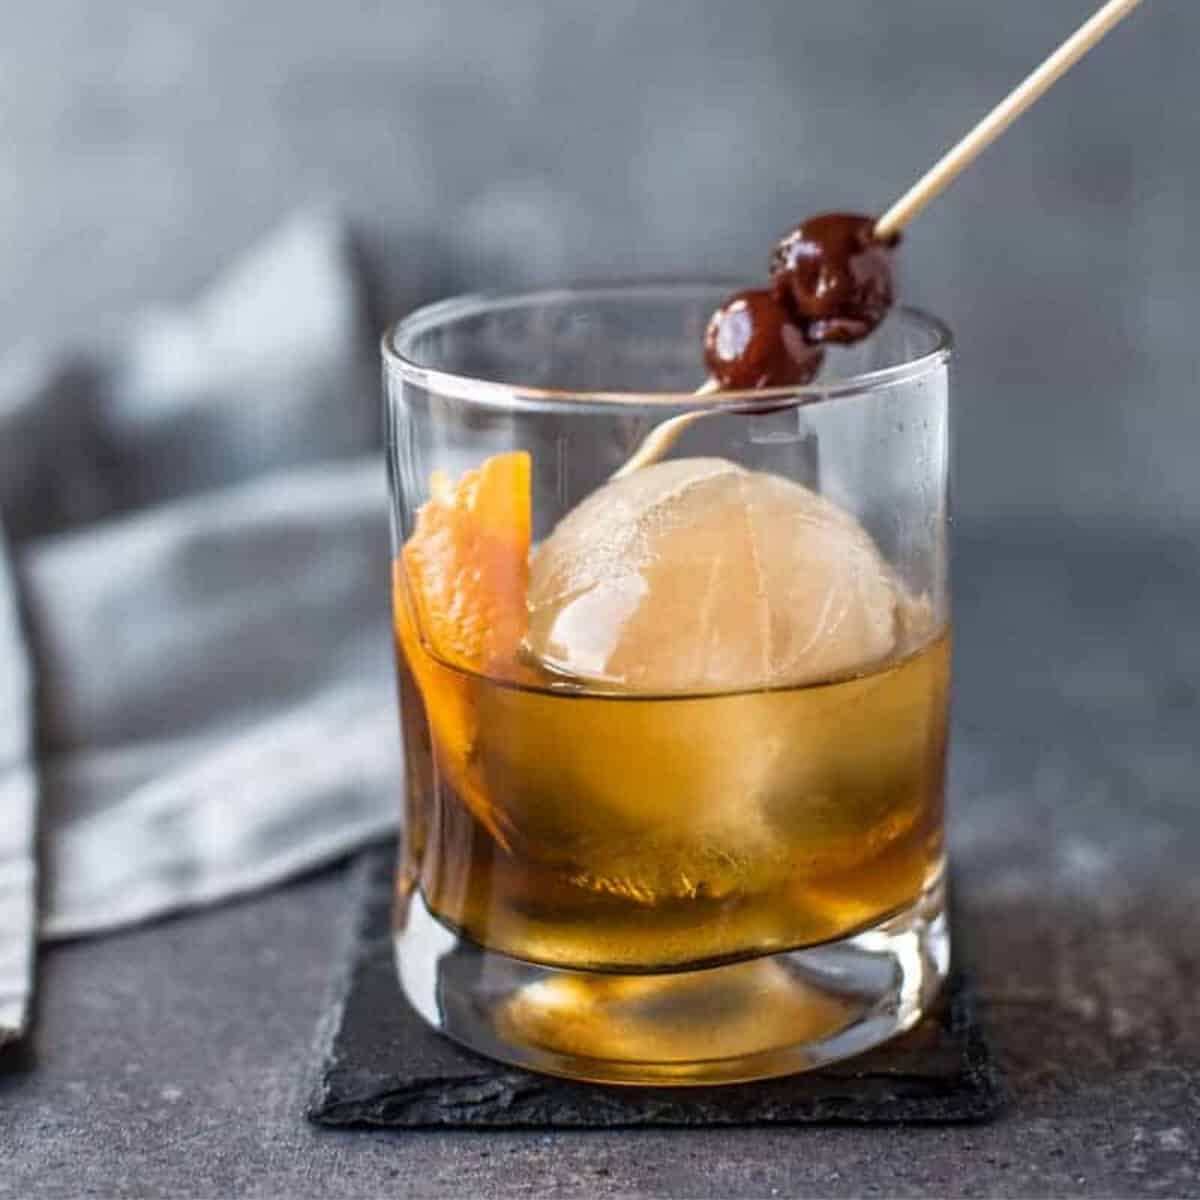 How to Smoke Ice: Smoked Ice Cubes for your Favorite Cocktail